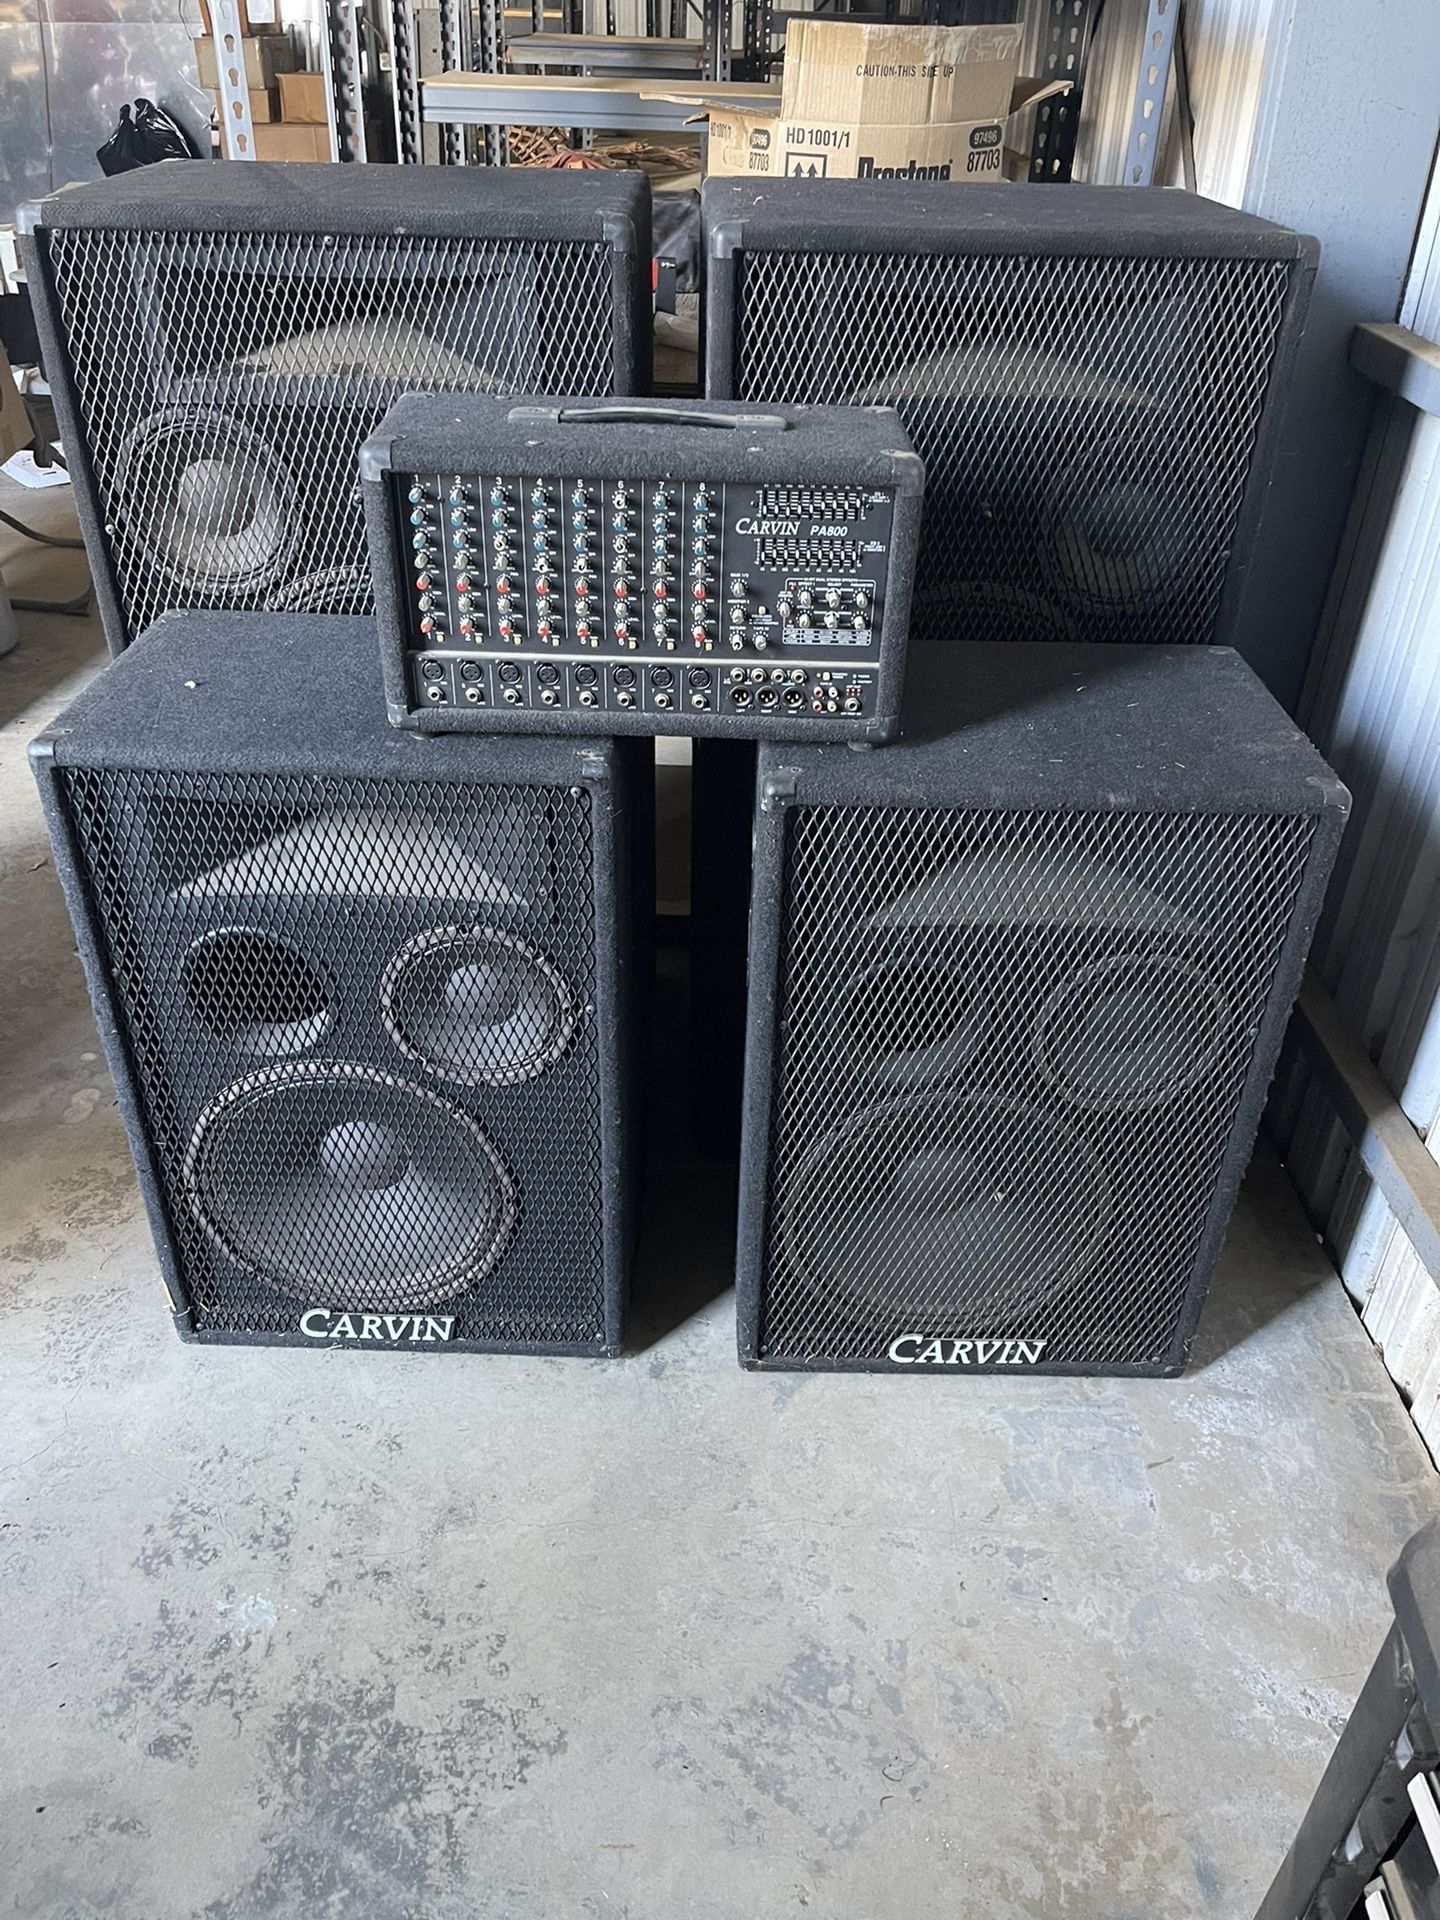 Harbinger LP 9800 Powered Mixer PA System for Sale in Spring Valley, CA -  OfferUp